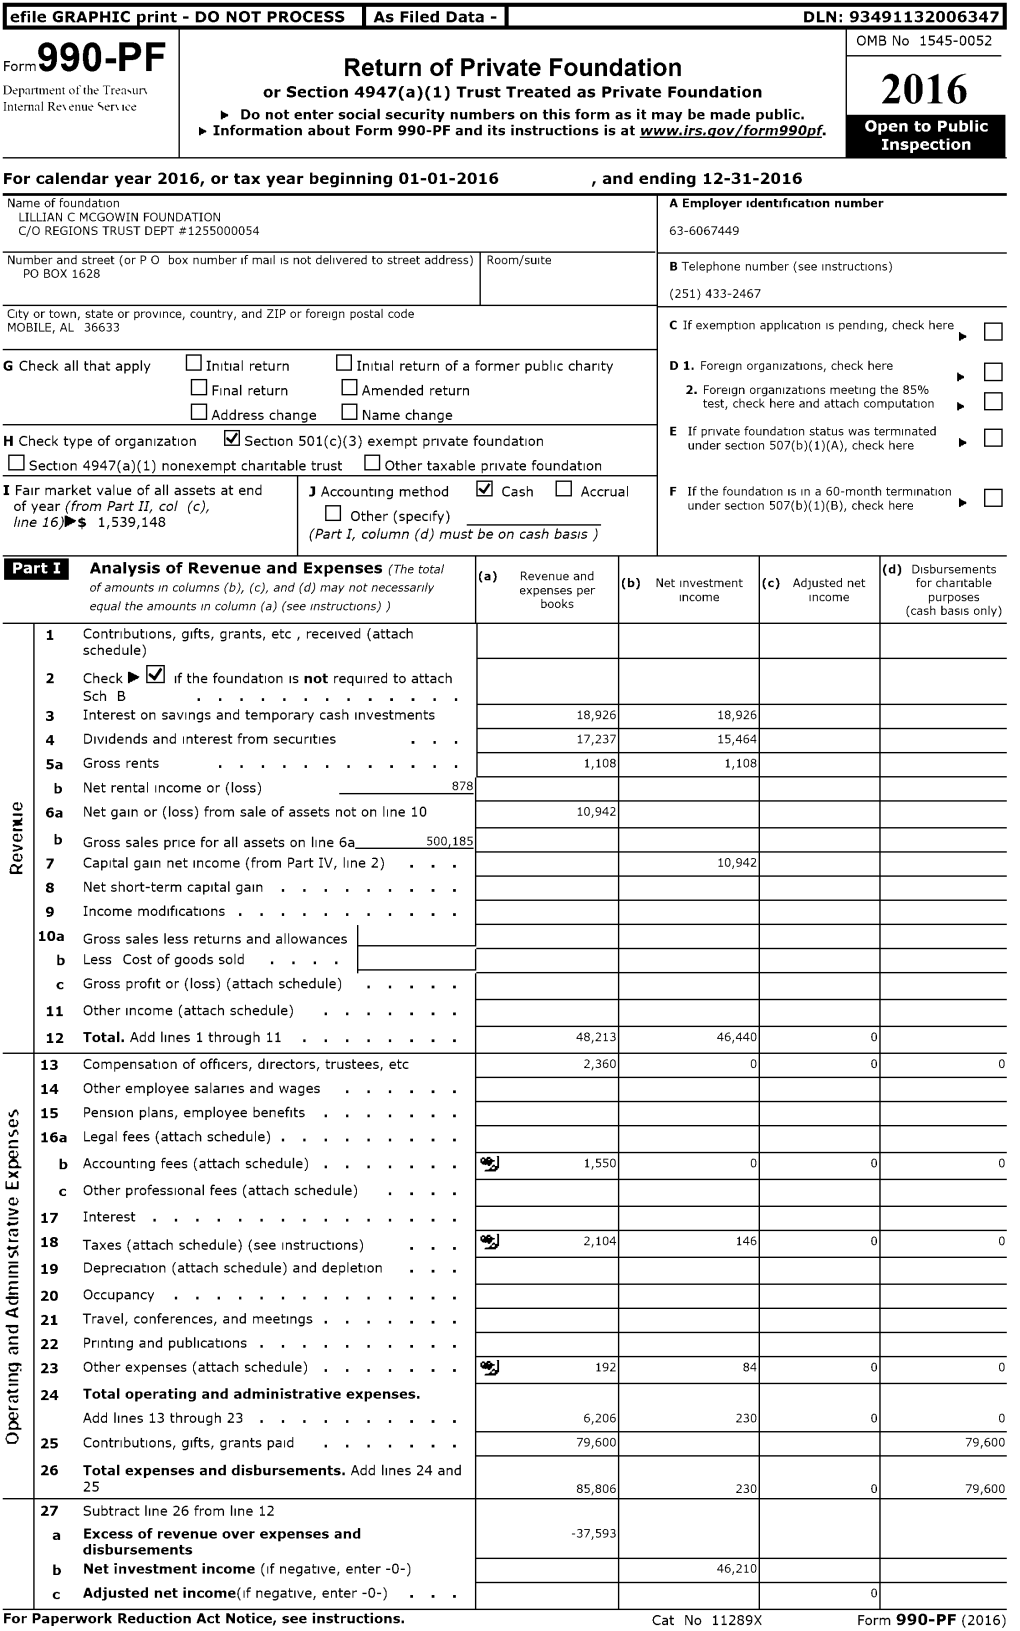 2016 Internal Re, Enue ',En Ice ► Do Not Enter Social Security Numbers on This Form As It May Be Made Public